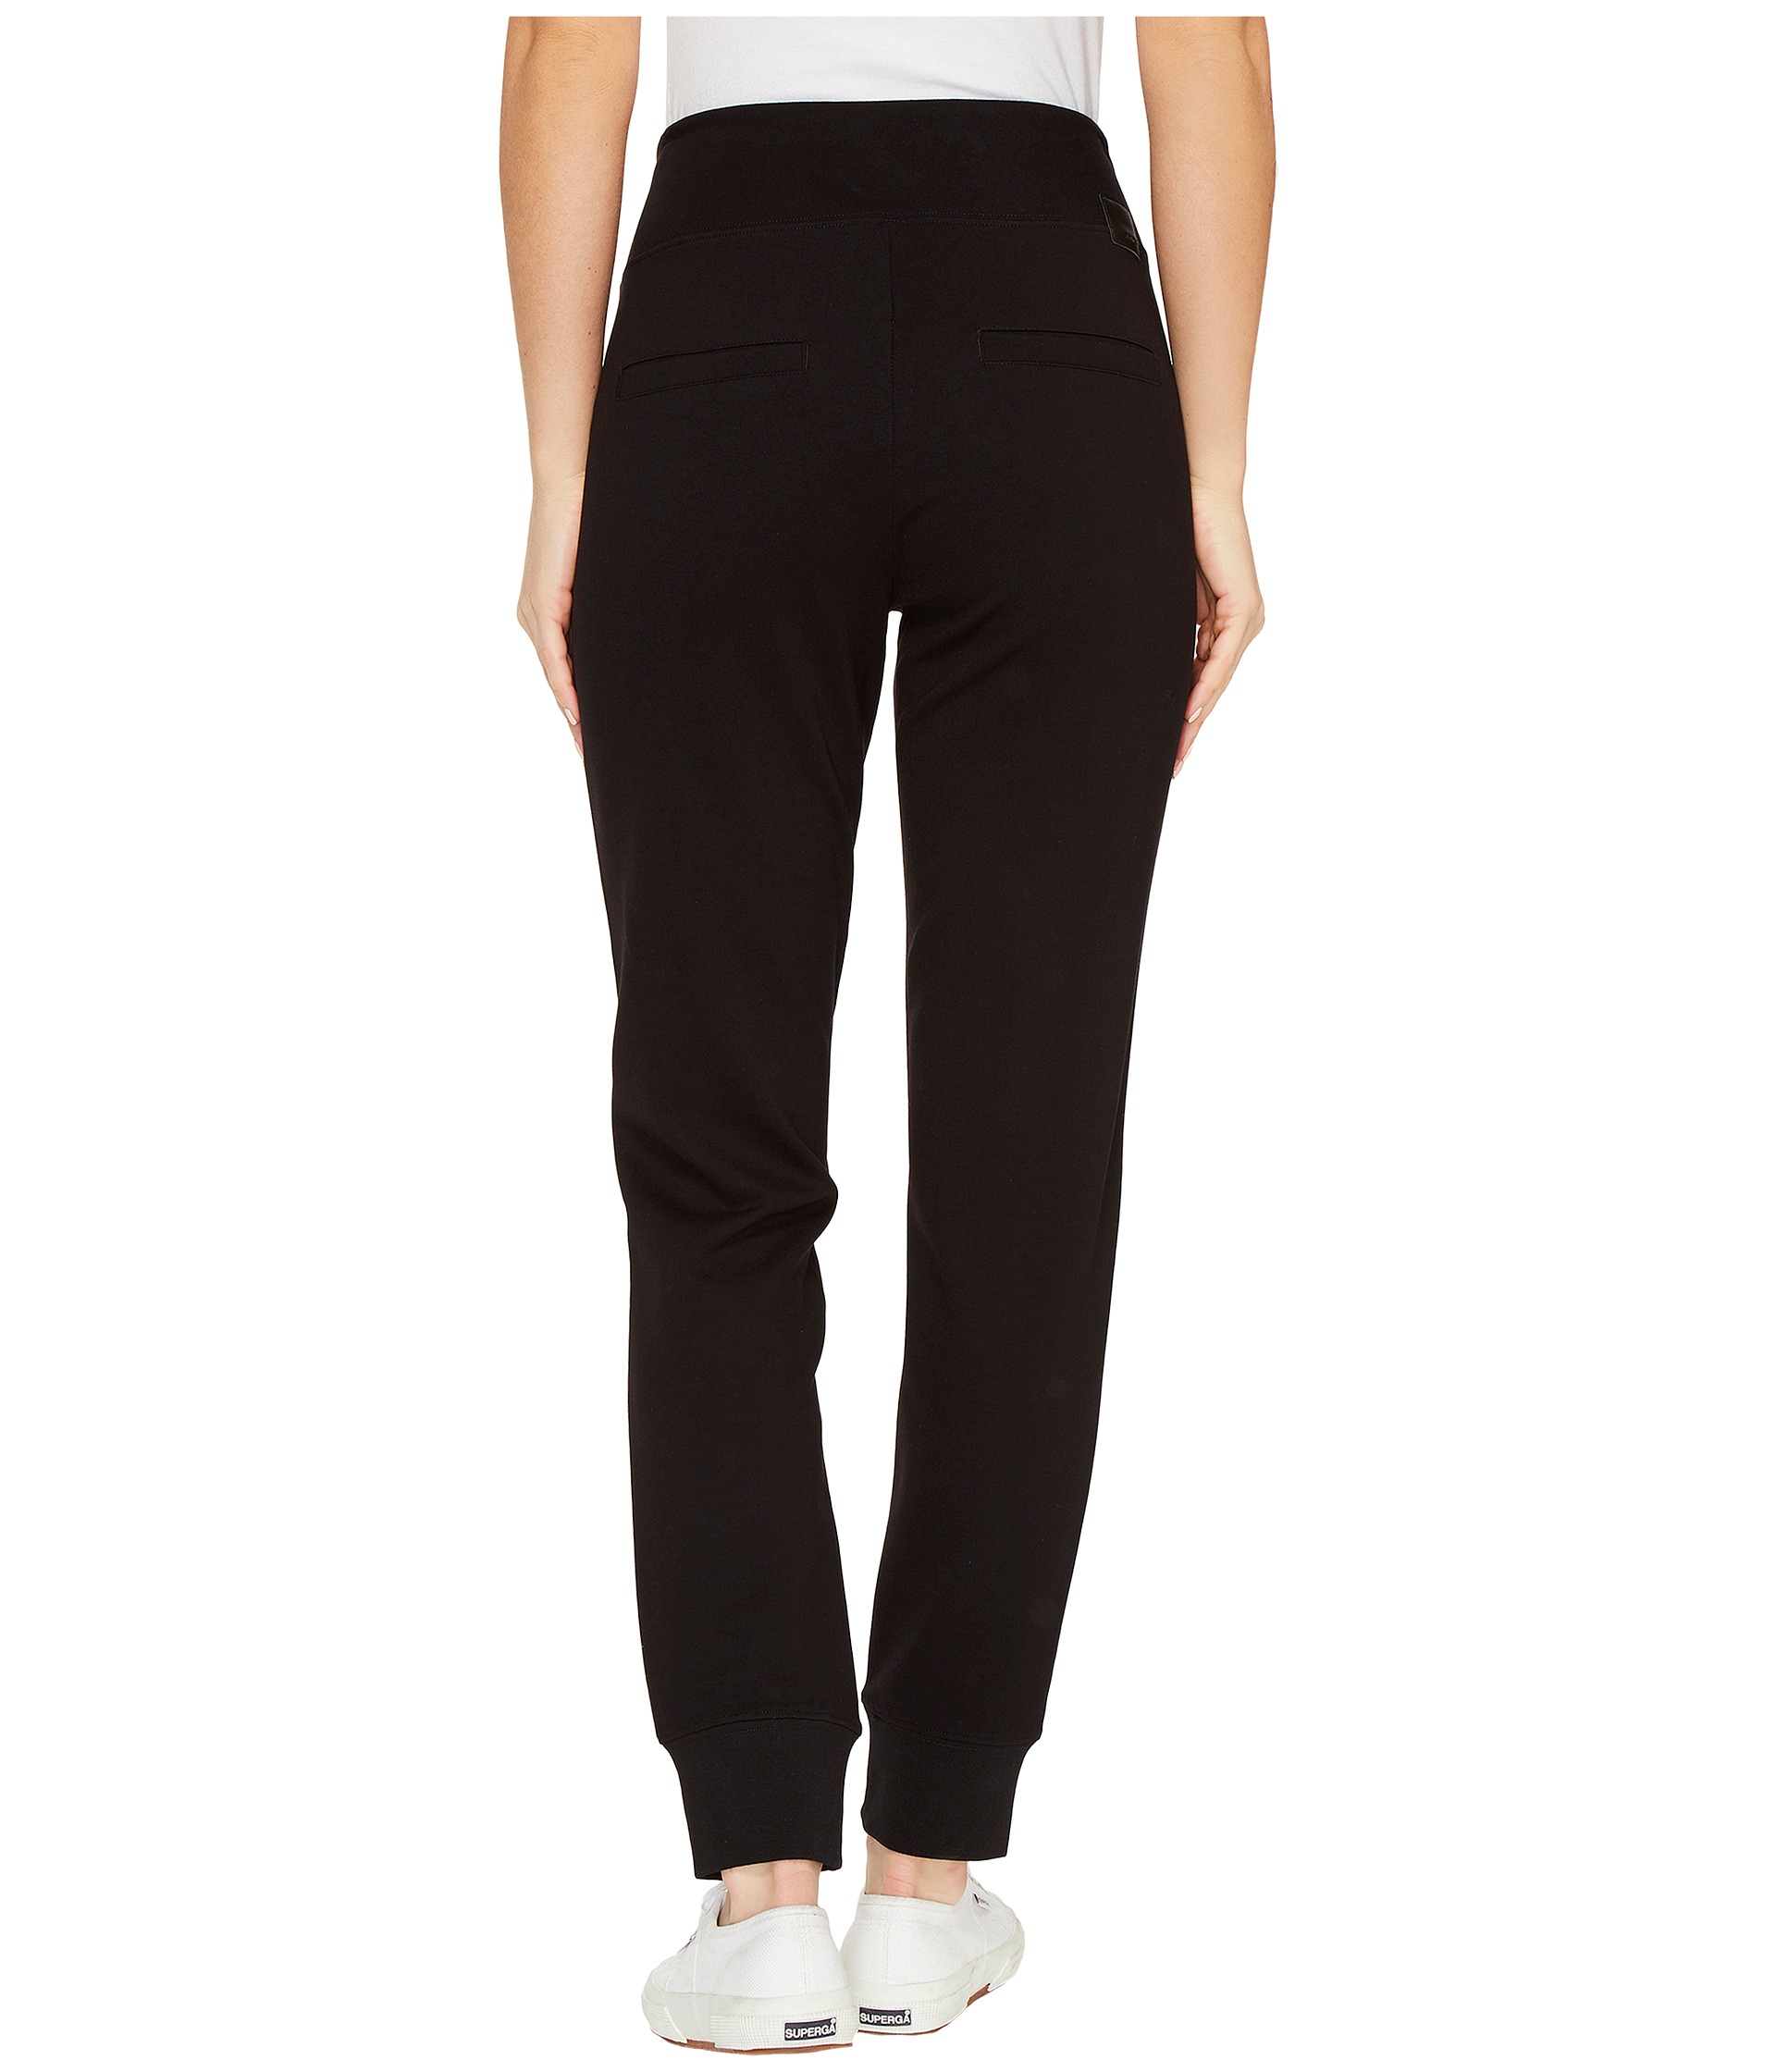 Jag Jeans Addie Jogger in Double Knit Ponte in Black at Zappos.com